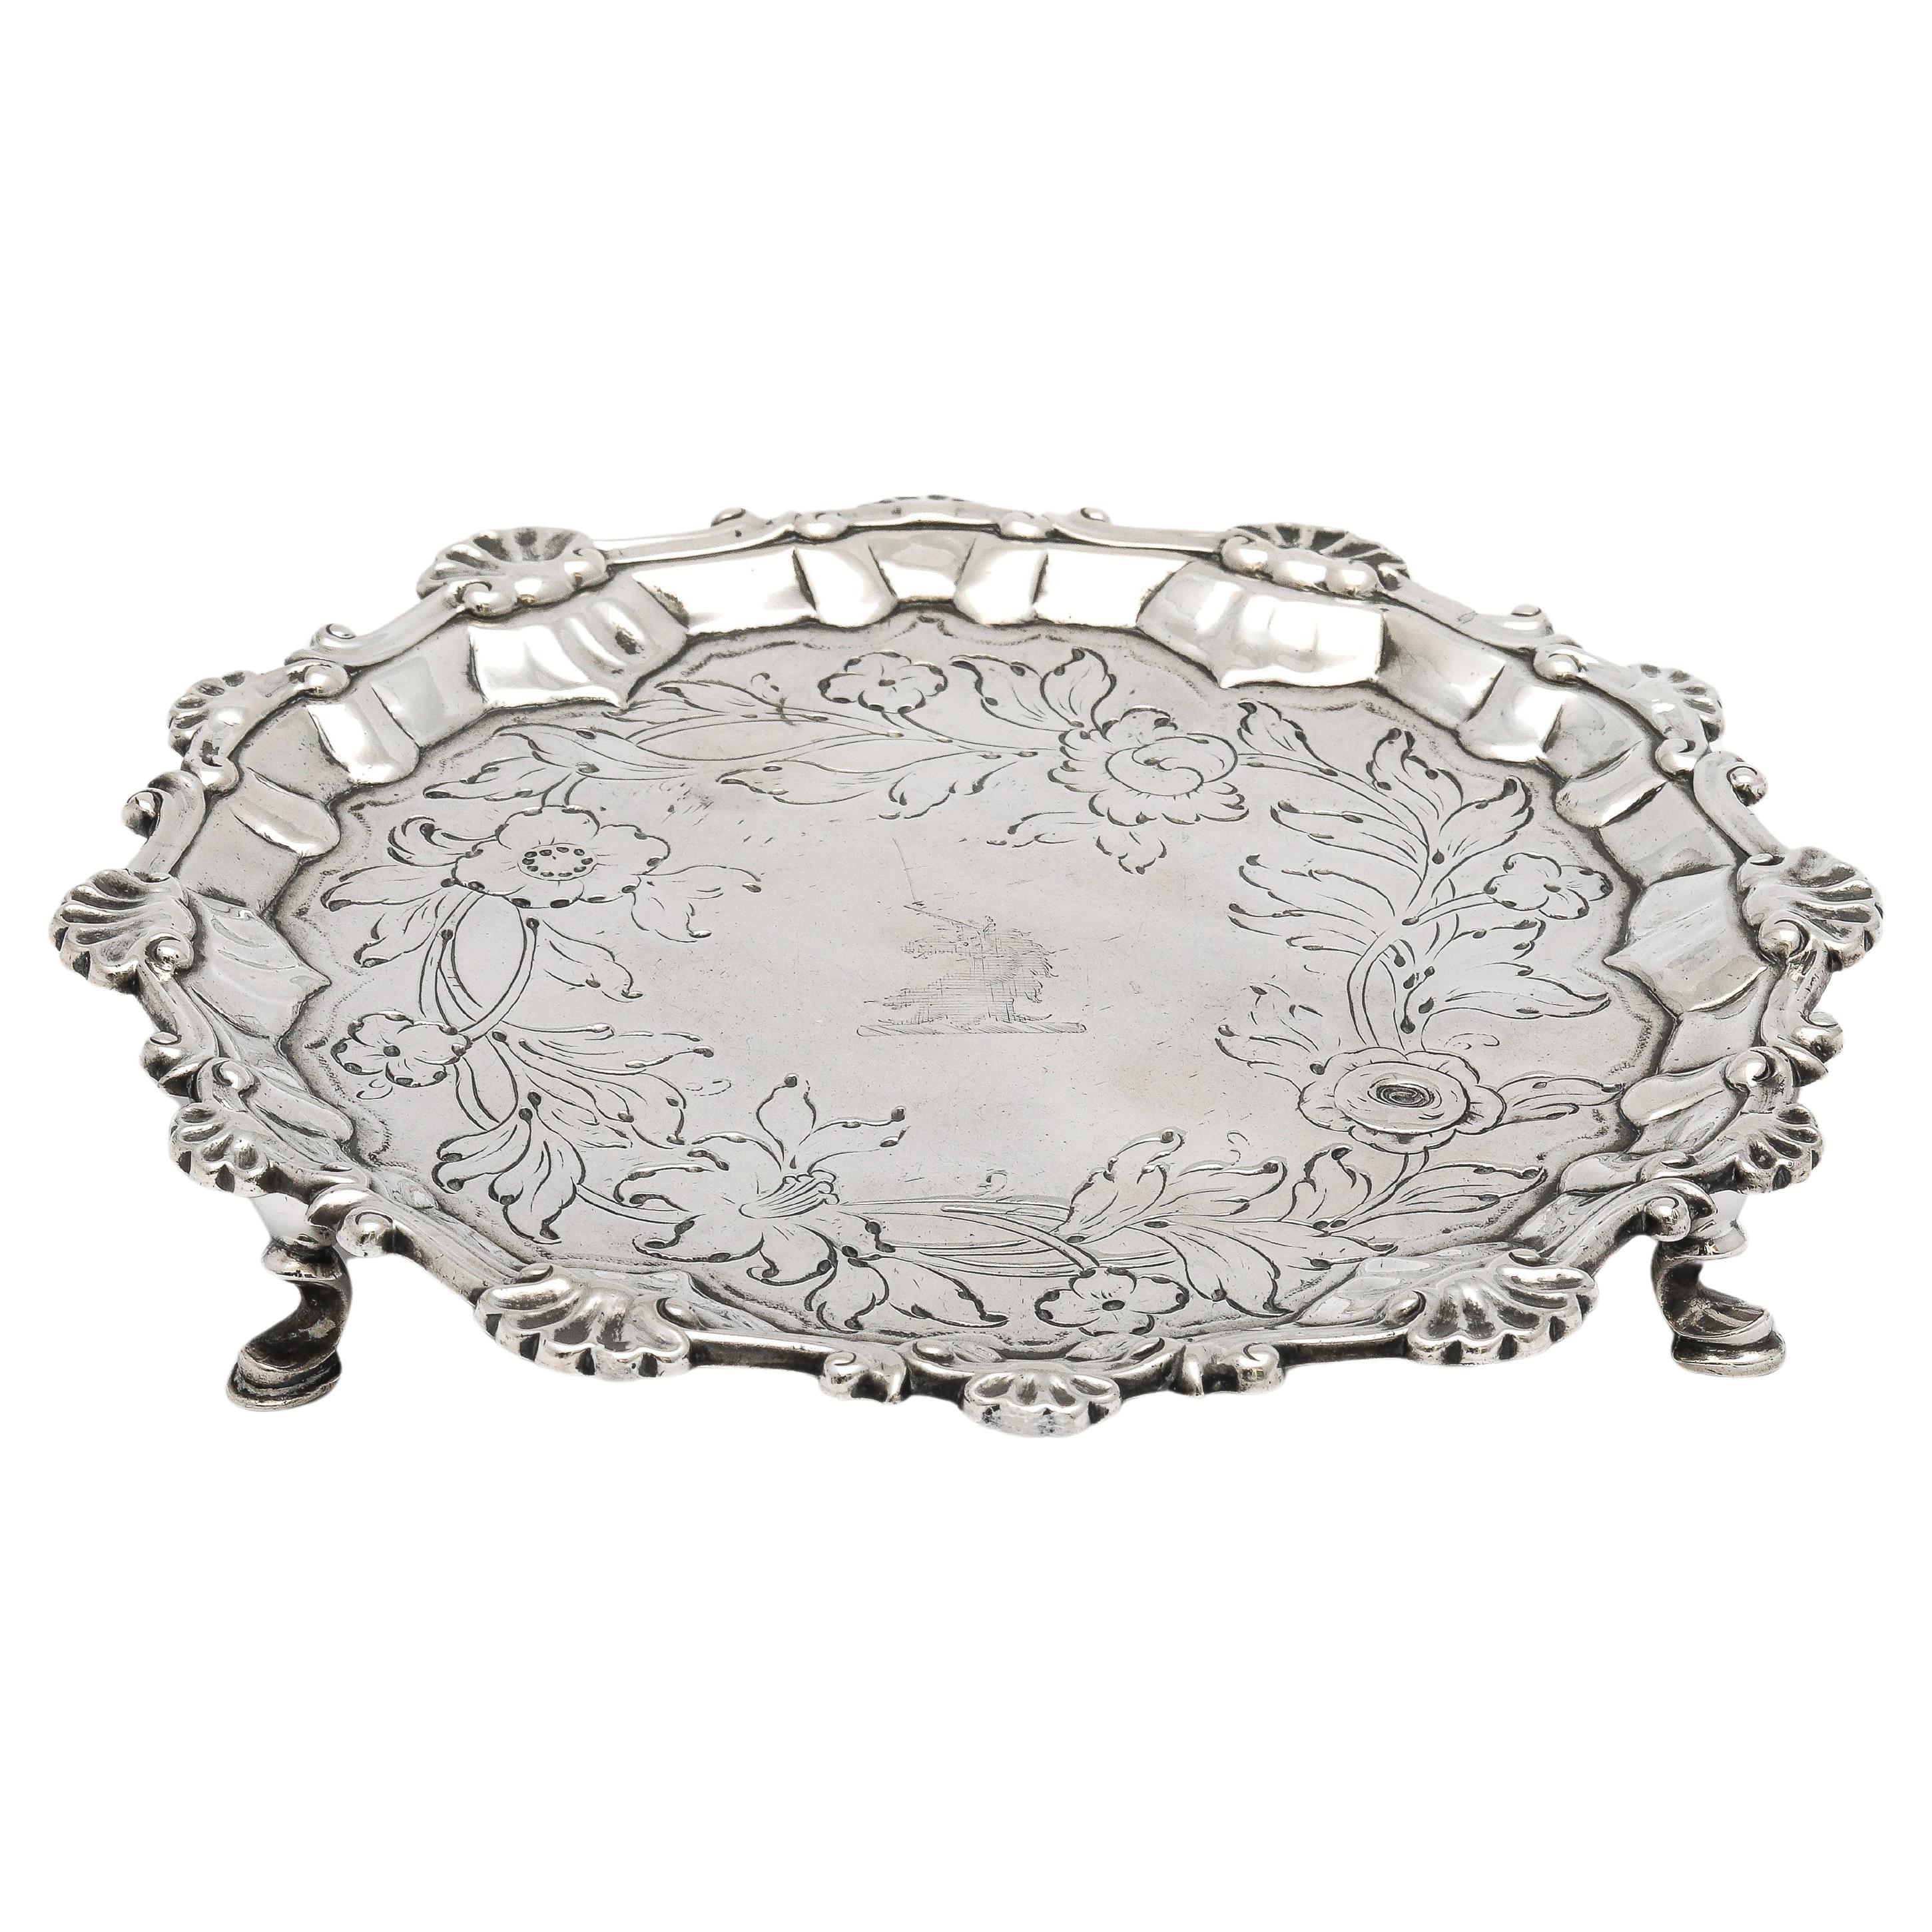 1760s Platters and Serveware